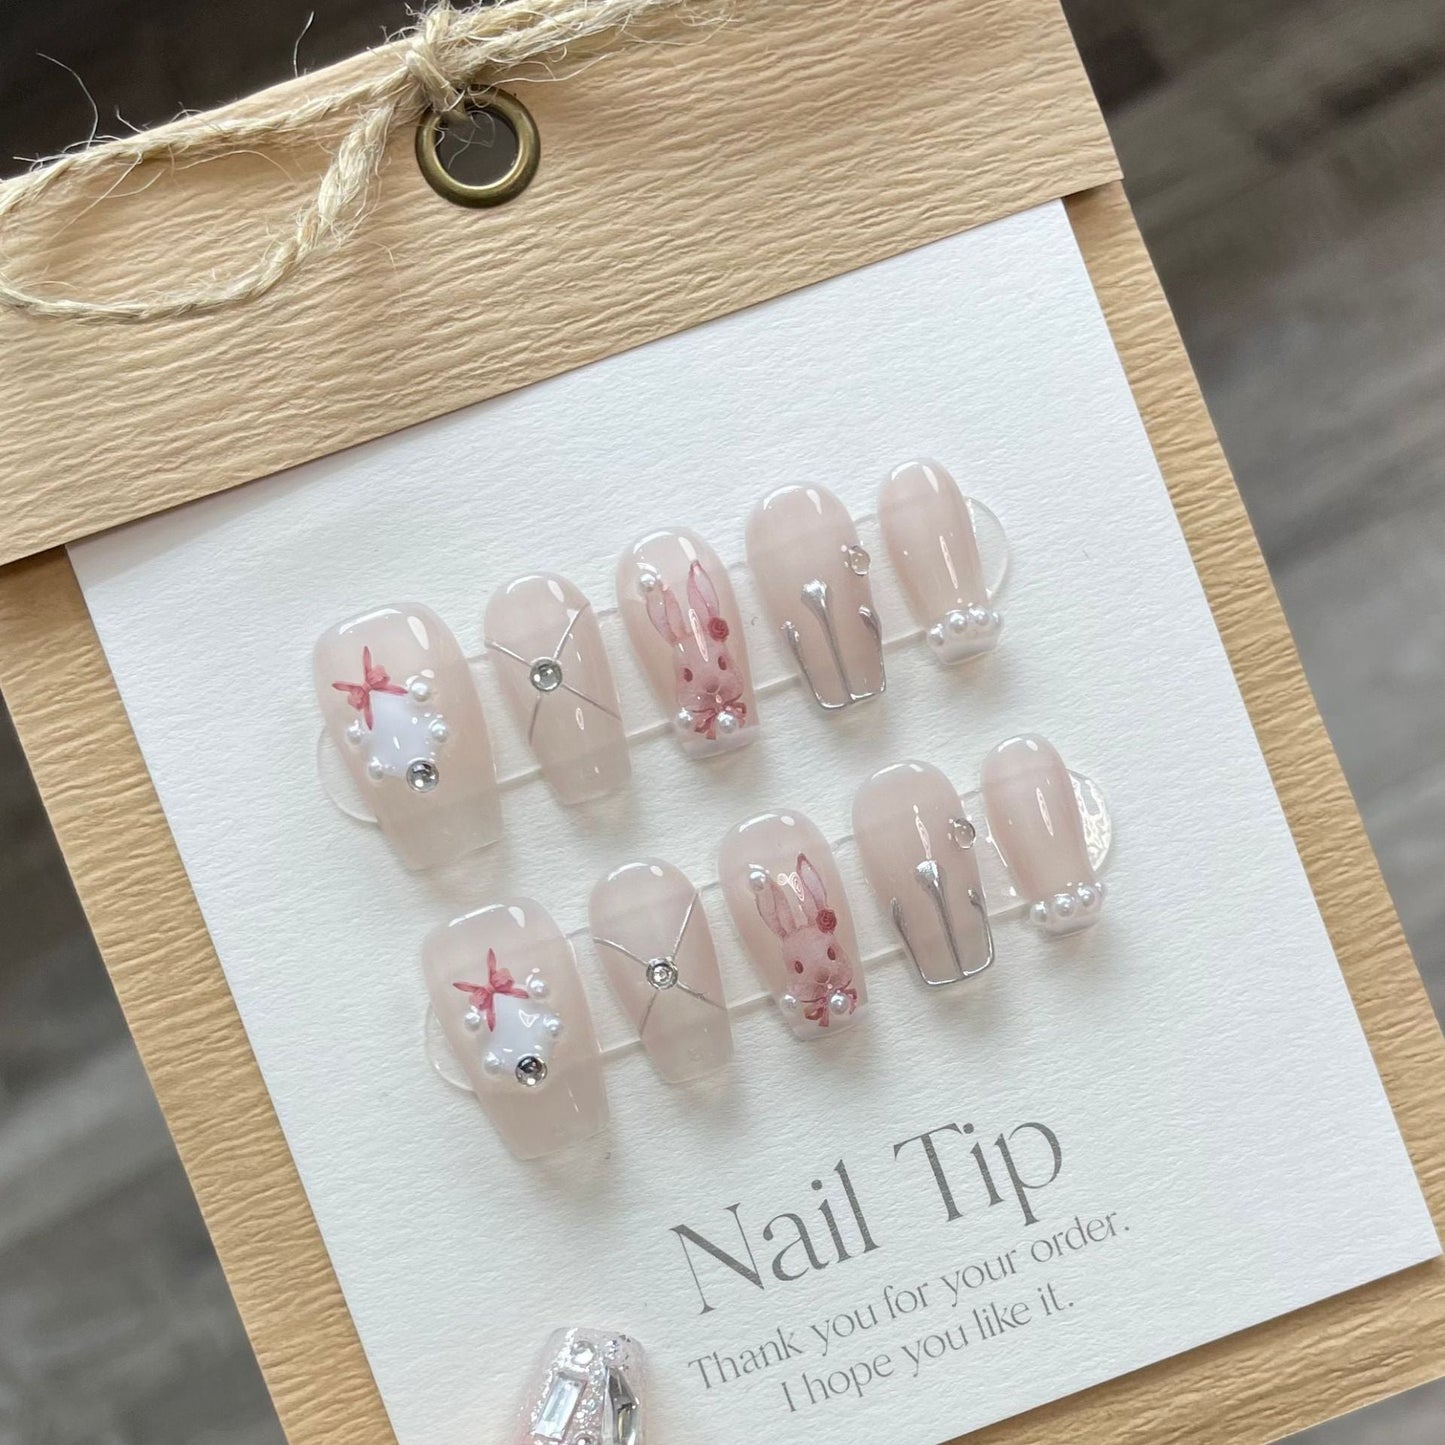 734 rabbit style press on nails 100% handmade false nails nude color pink